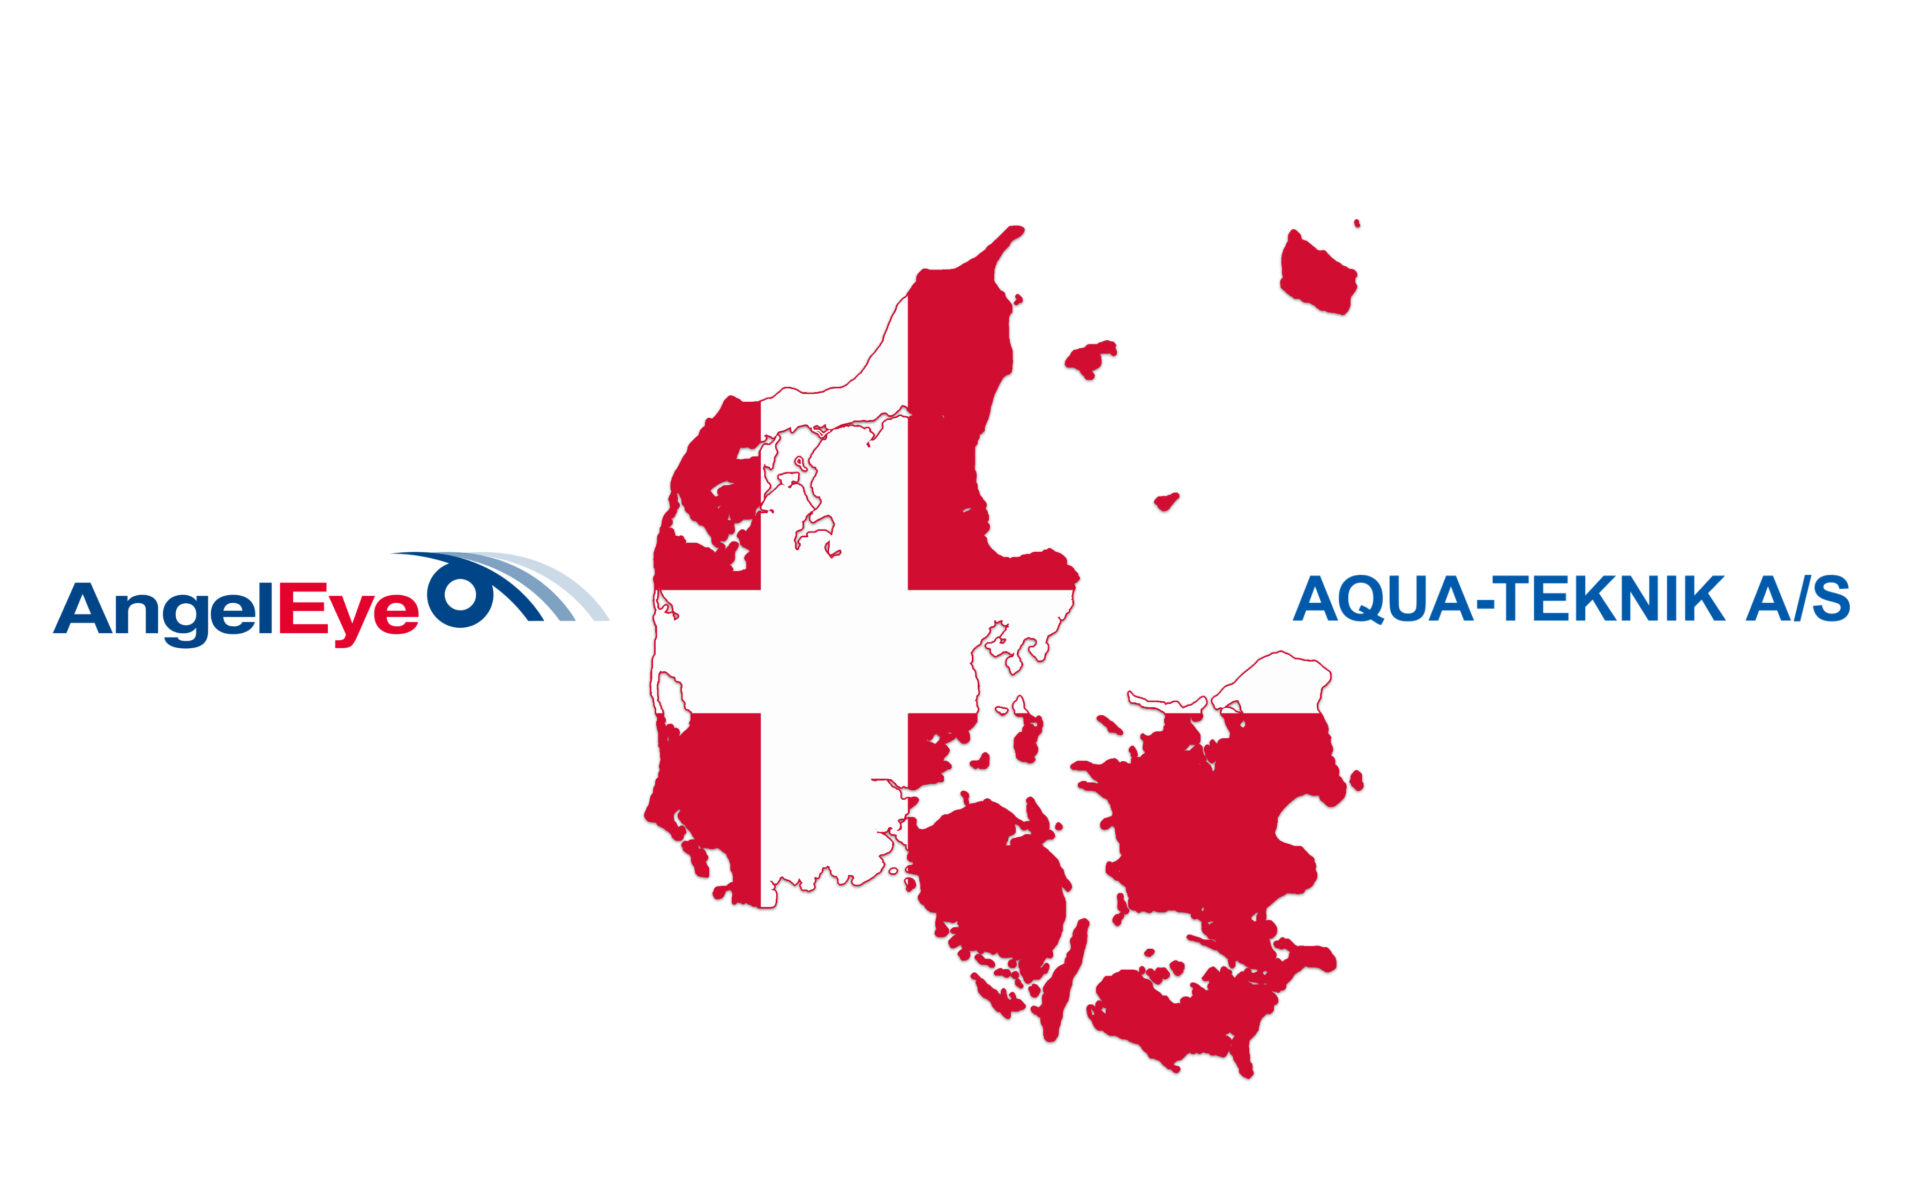 AngelEye expands its presence in Scandinavia with an exclusive partner in Denmark Aqua Teknik Image scaled